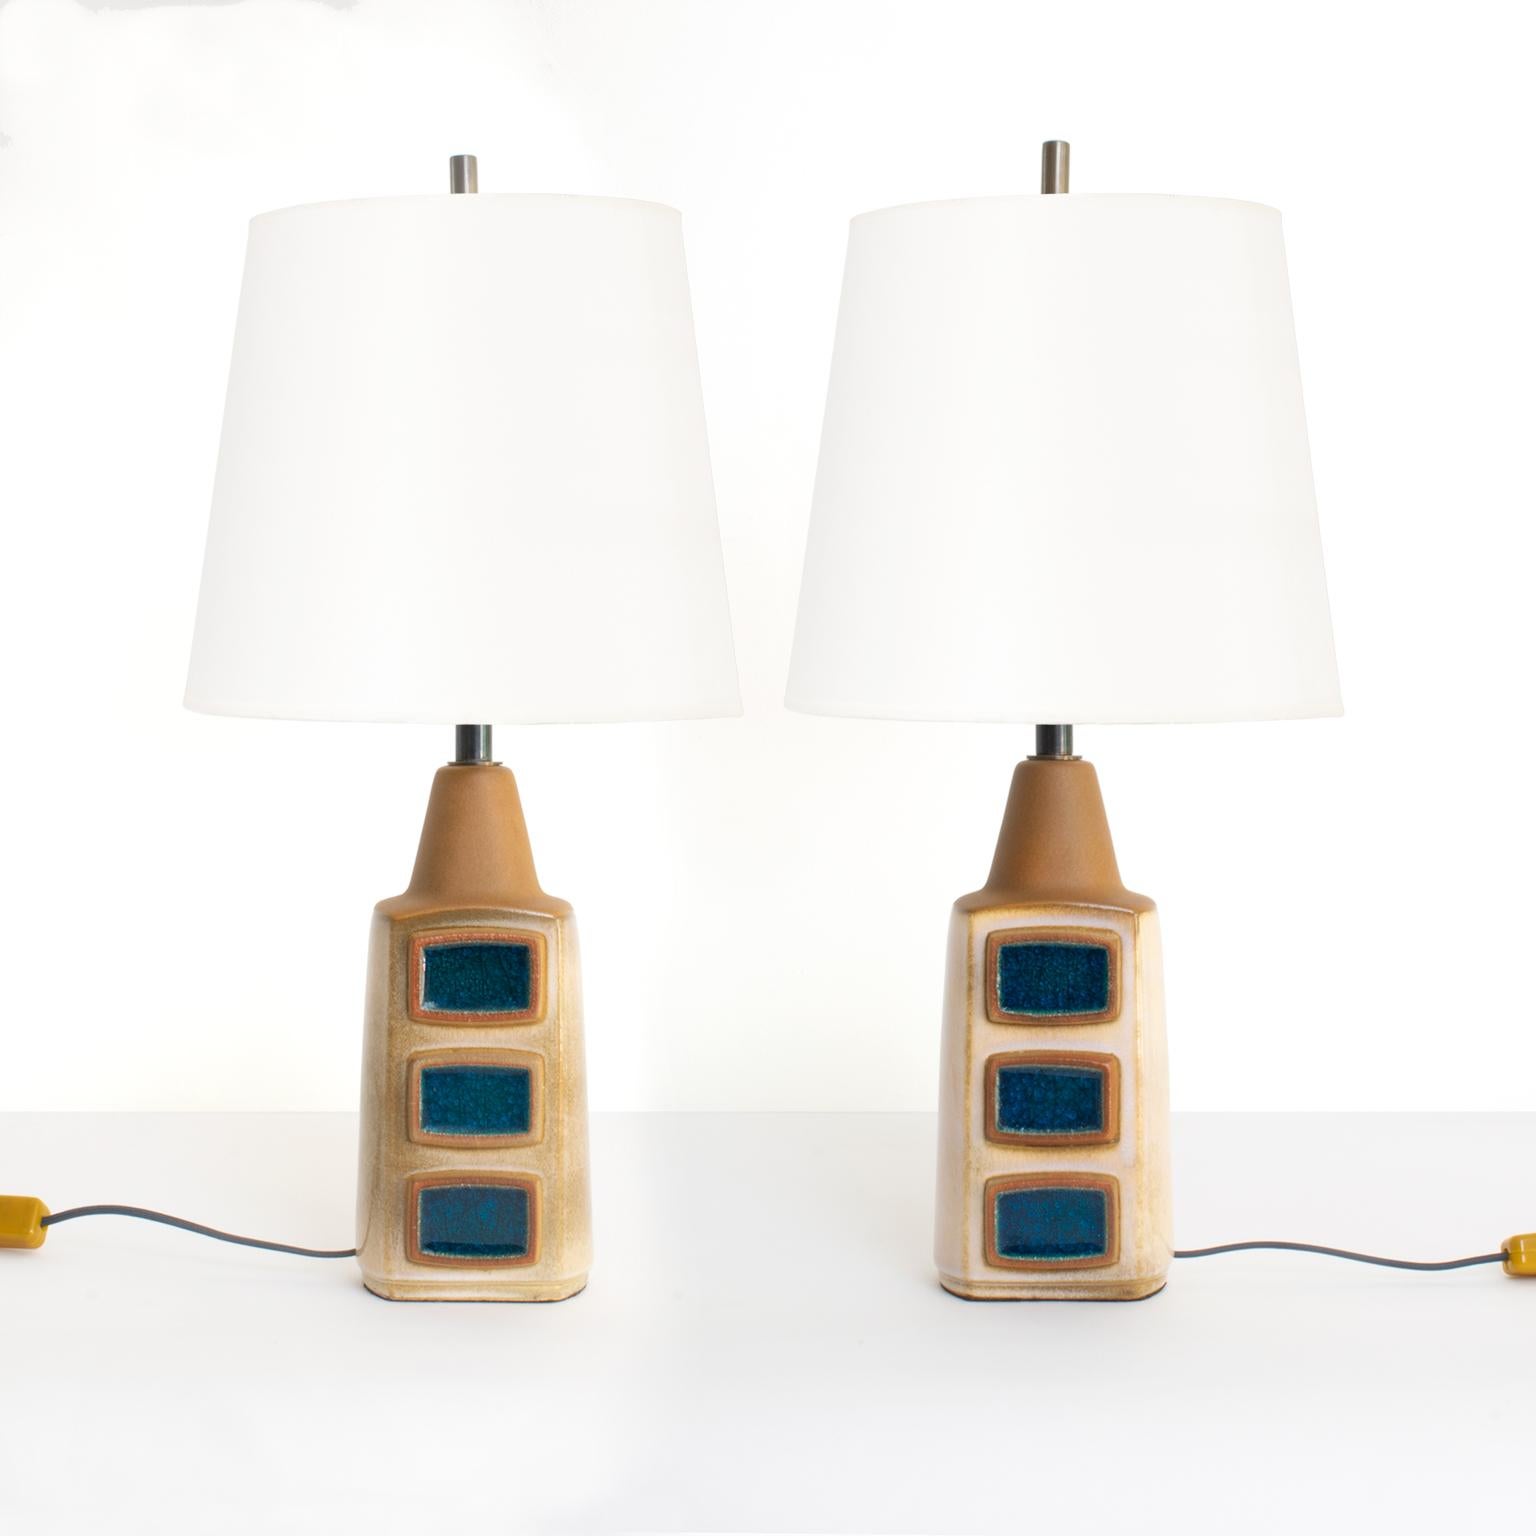 Einar Johansen for Soholm Stentøj Pair Scandinavian Modern Glazed Ceramic Lamps, Denmark, circa 1960. The lamps have custom patinated brass hardware including bespoke finials and double cluster sockets for use in the USA. Measures: Total height: